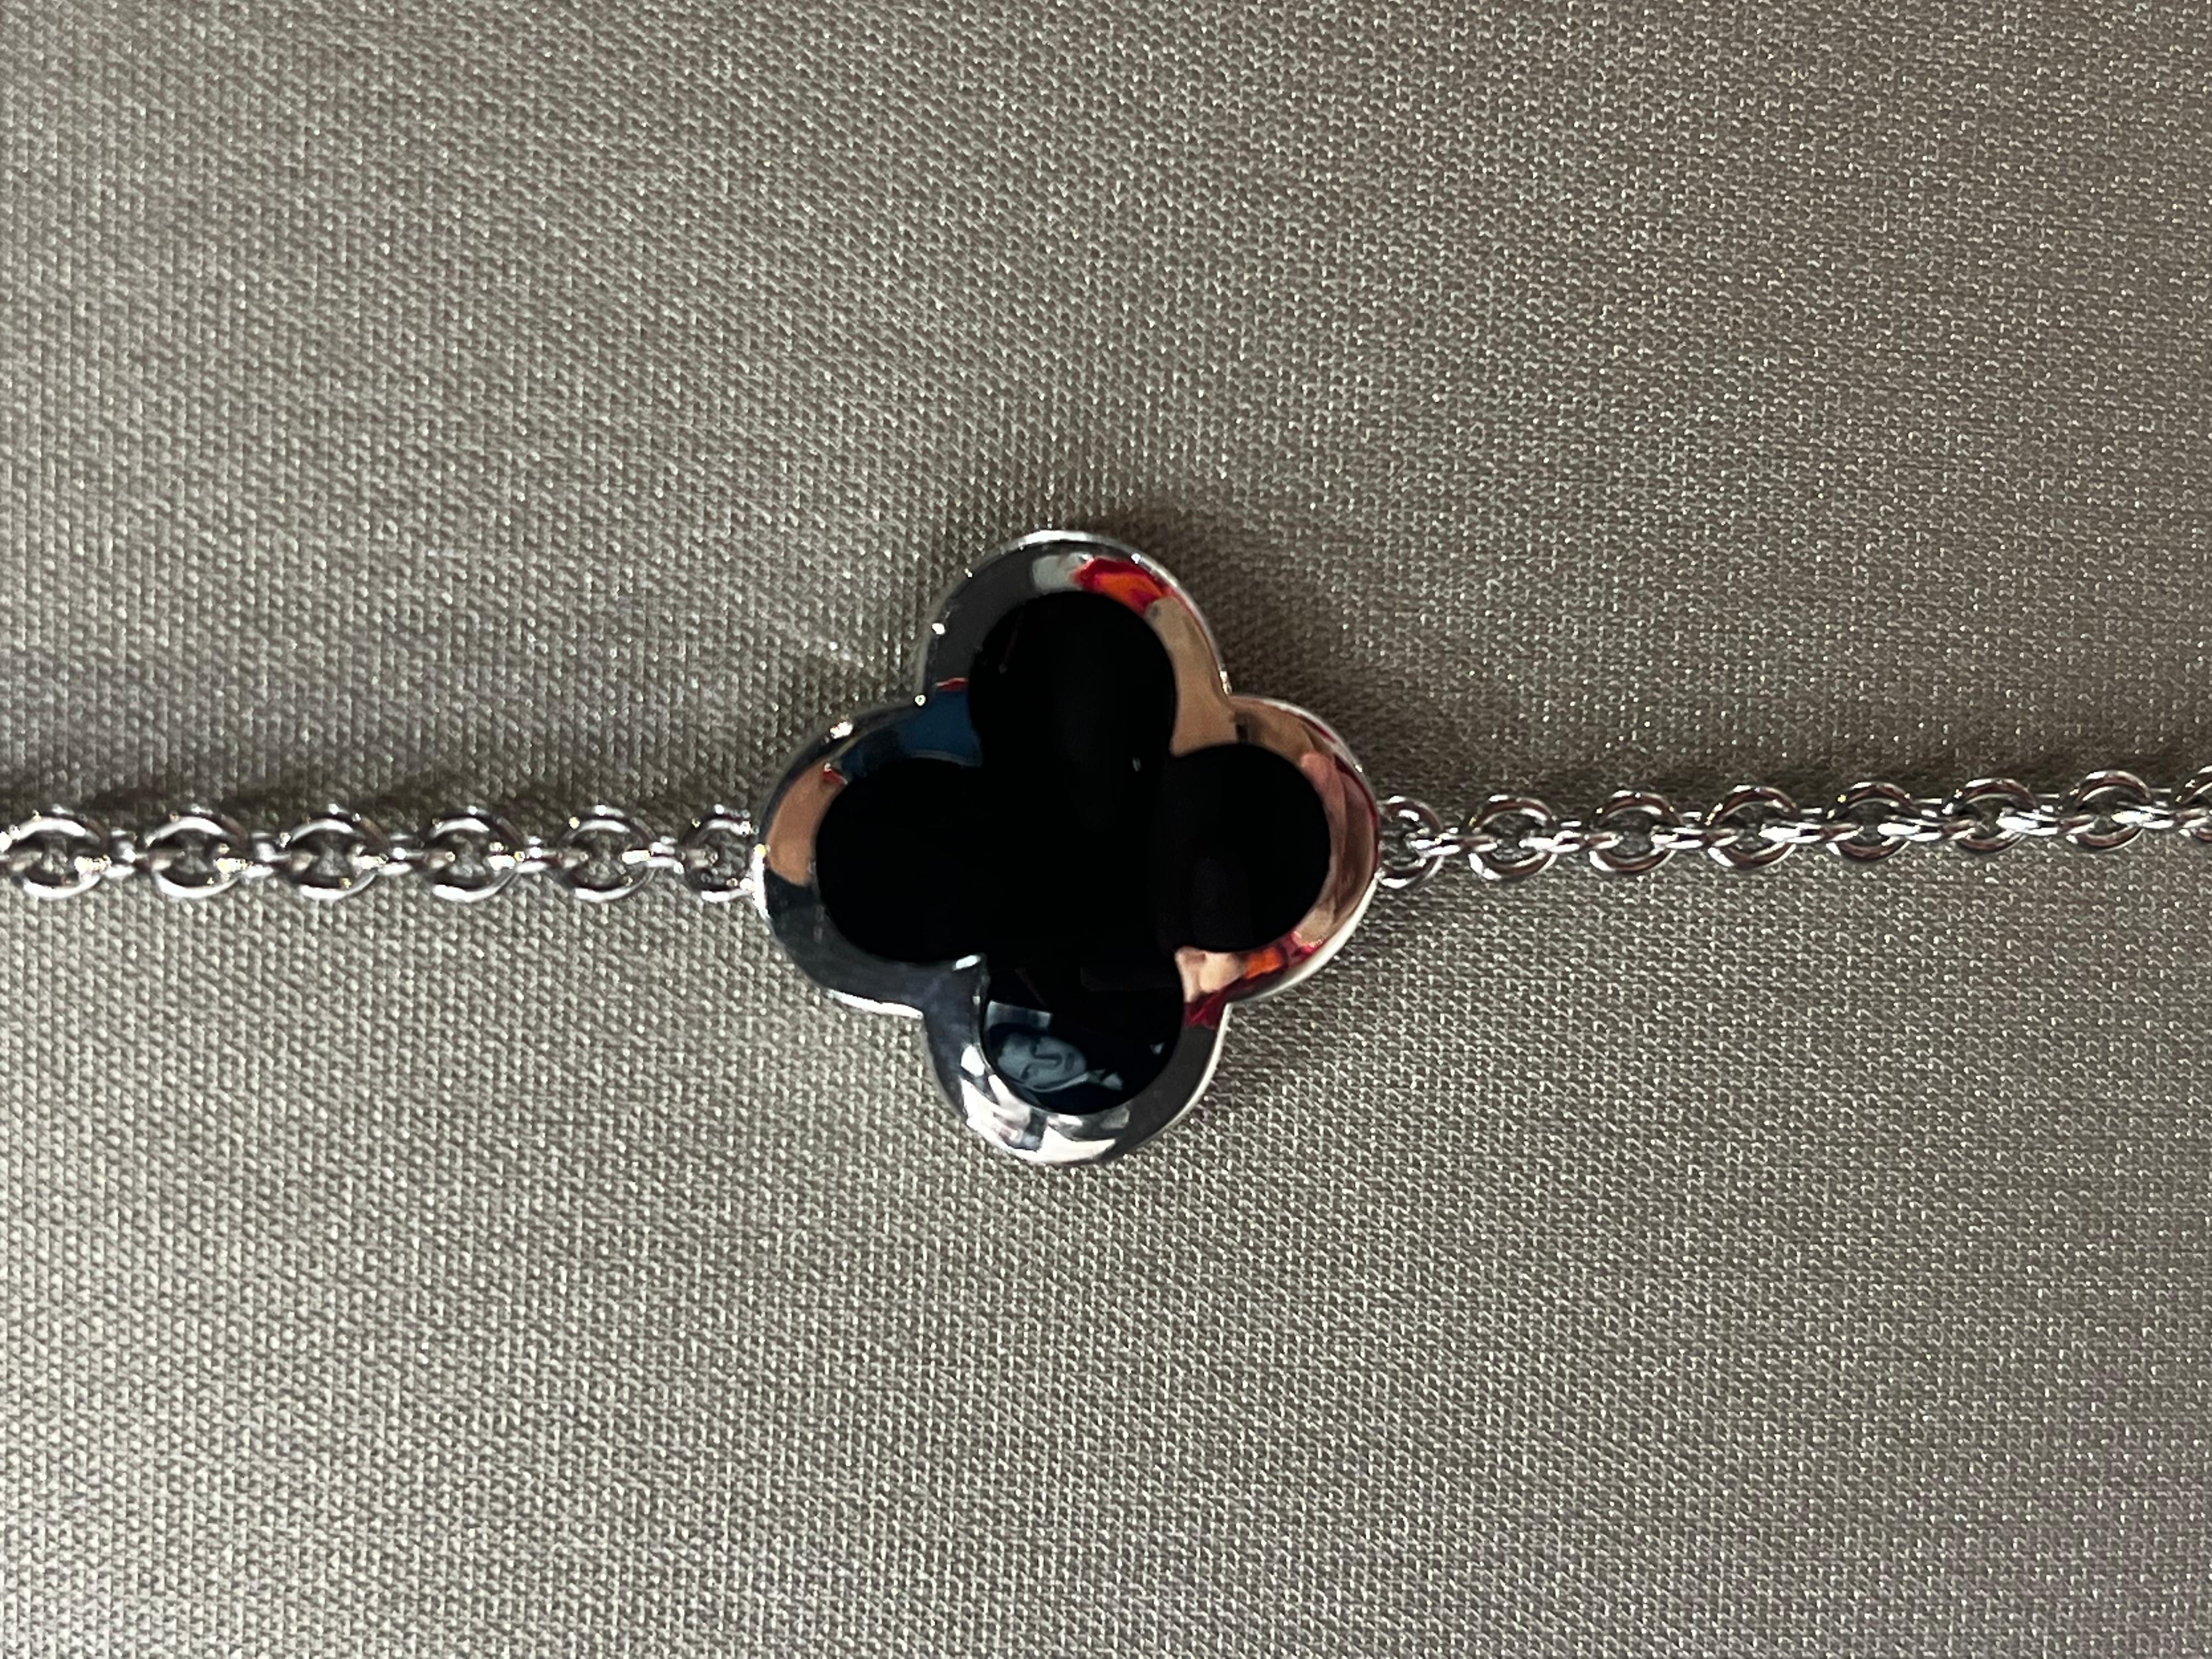 Modern RARE Van Cleef & Arpels Pure Alhambra Onyx and White Gold 14 Motif Necklace For Sale